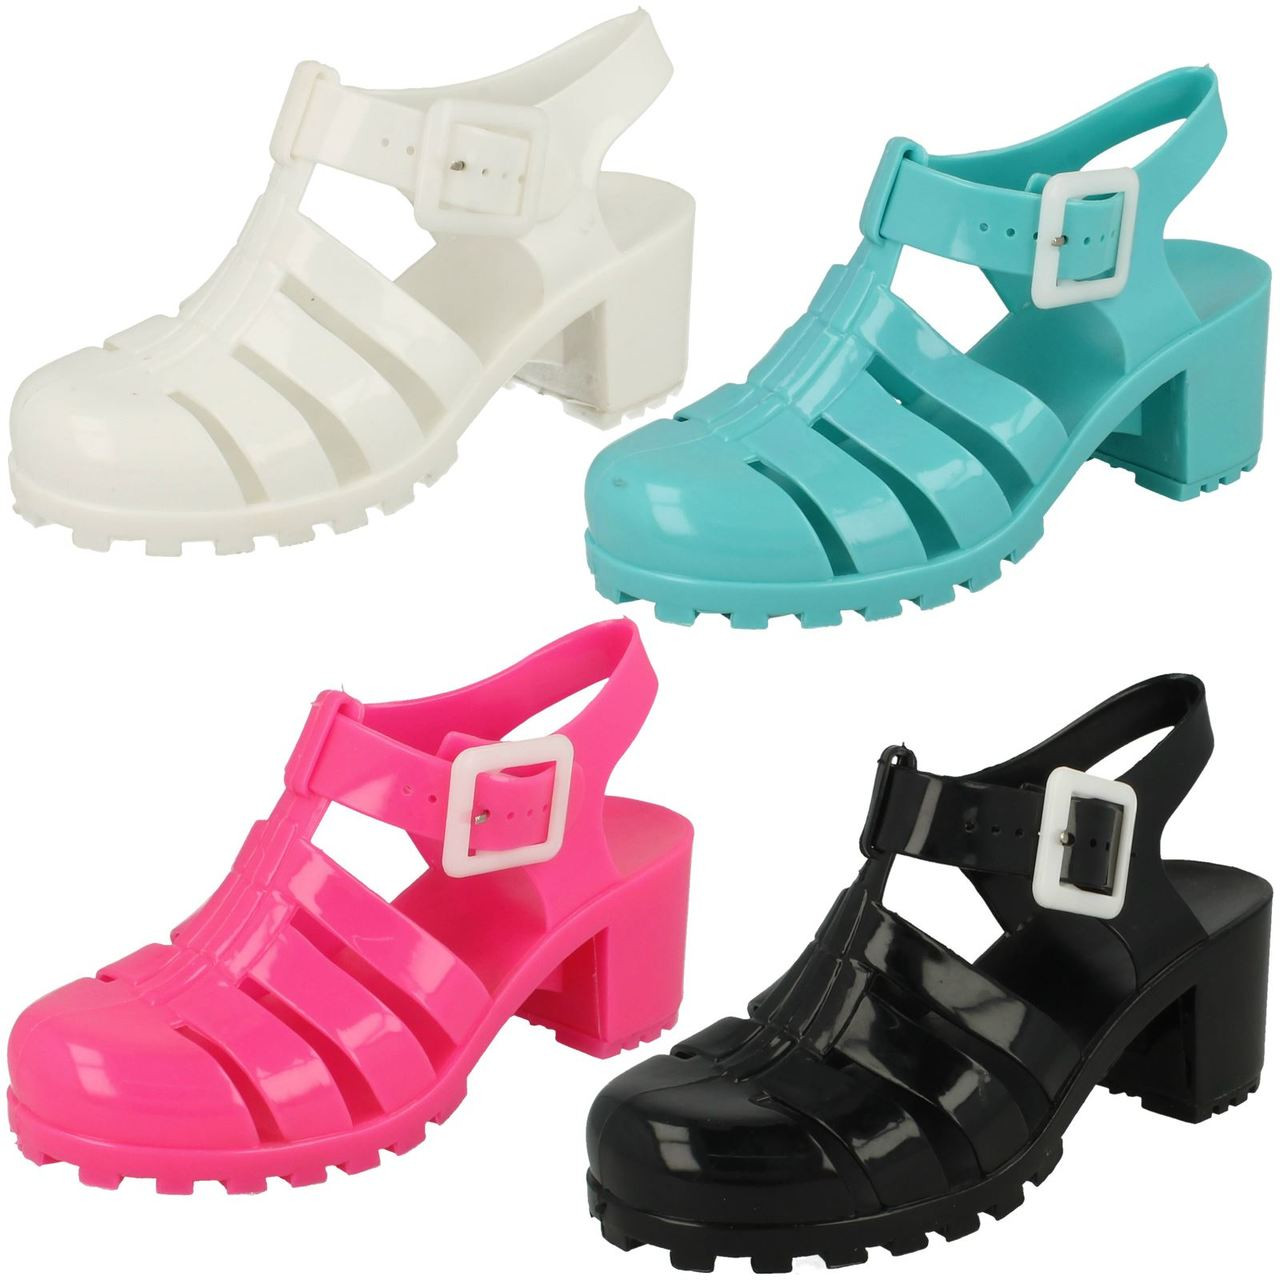 childrens jelly shoes